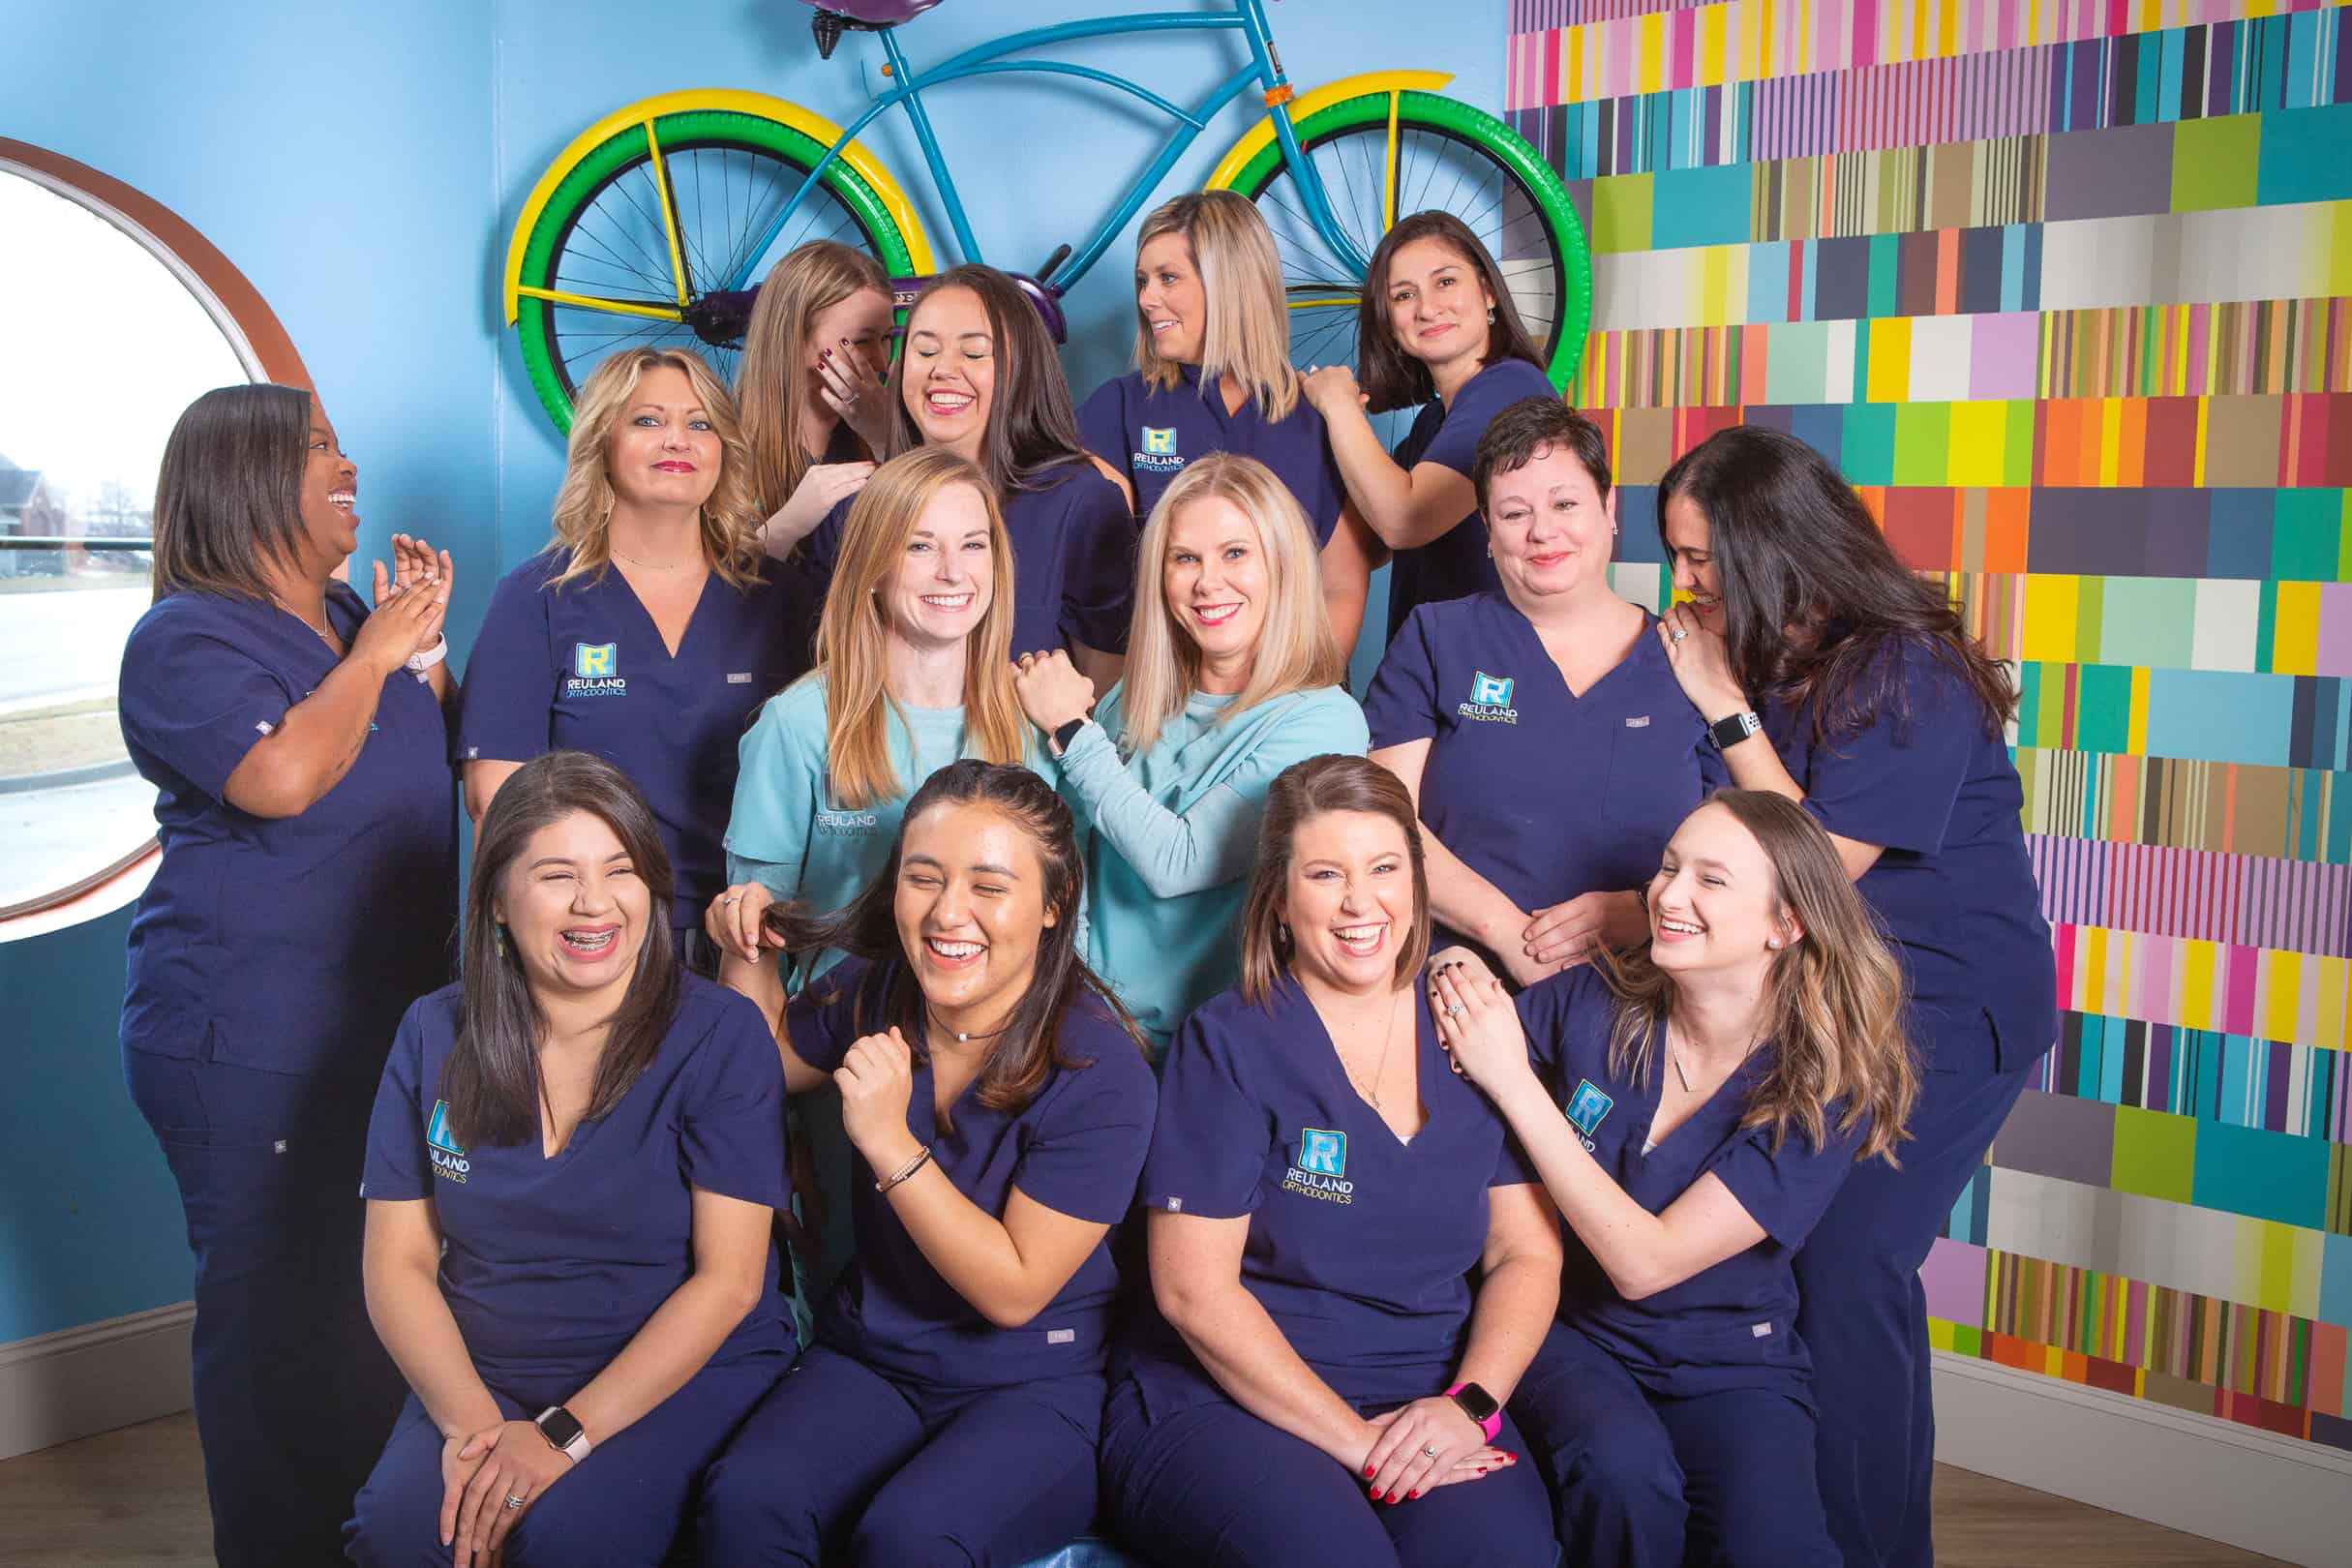 Reuland Orthodontics 2020 Orthodontic Team Pictures Dr. Barnhart 8 - Orthodontists In The Grand Saline, TX Area